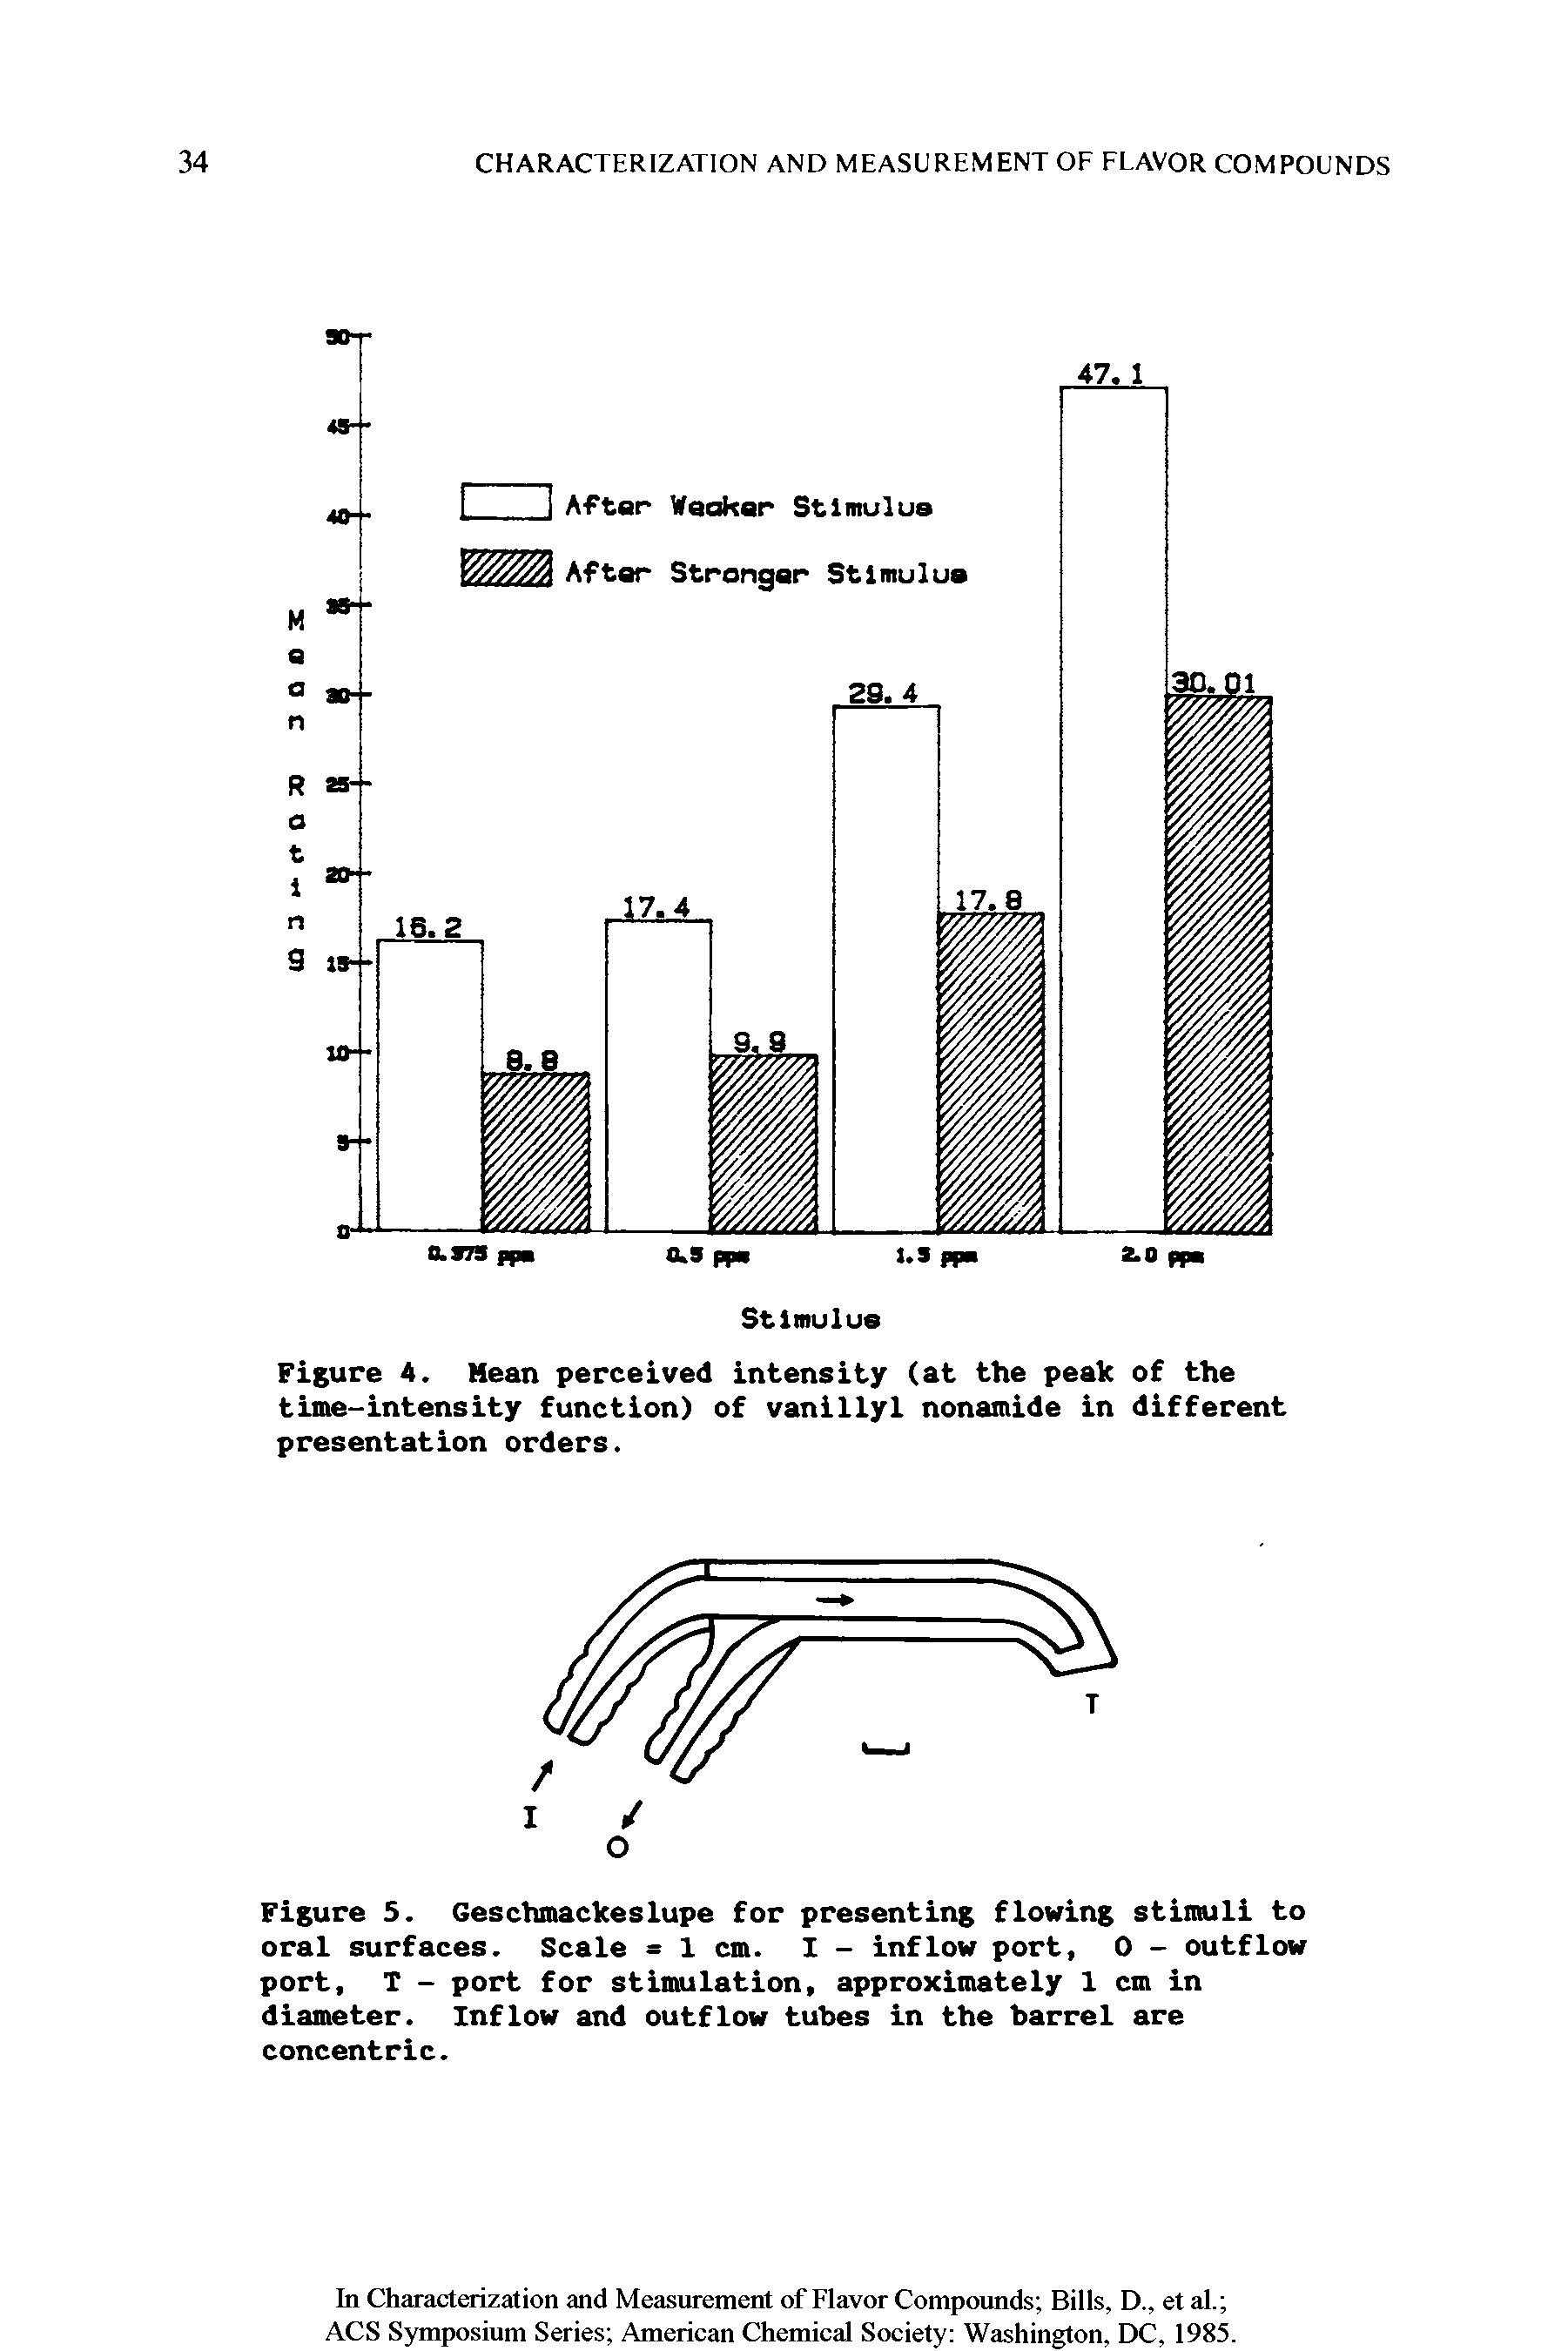 Figure 5. Geschmackeslupe for presenting flowing stimuli to oral surfaces. Scale = 1 cm. I - inflow port, 0 - outflow port, T - port for stimulation, approximately 1 cm in diameter. Inflow and outflow tubes in the barrel are concentric.